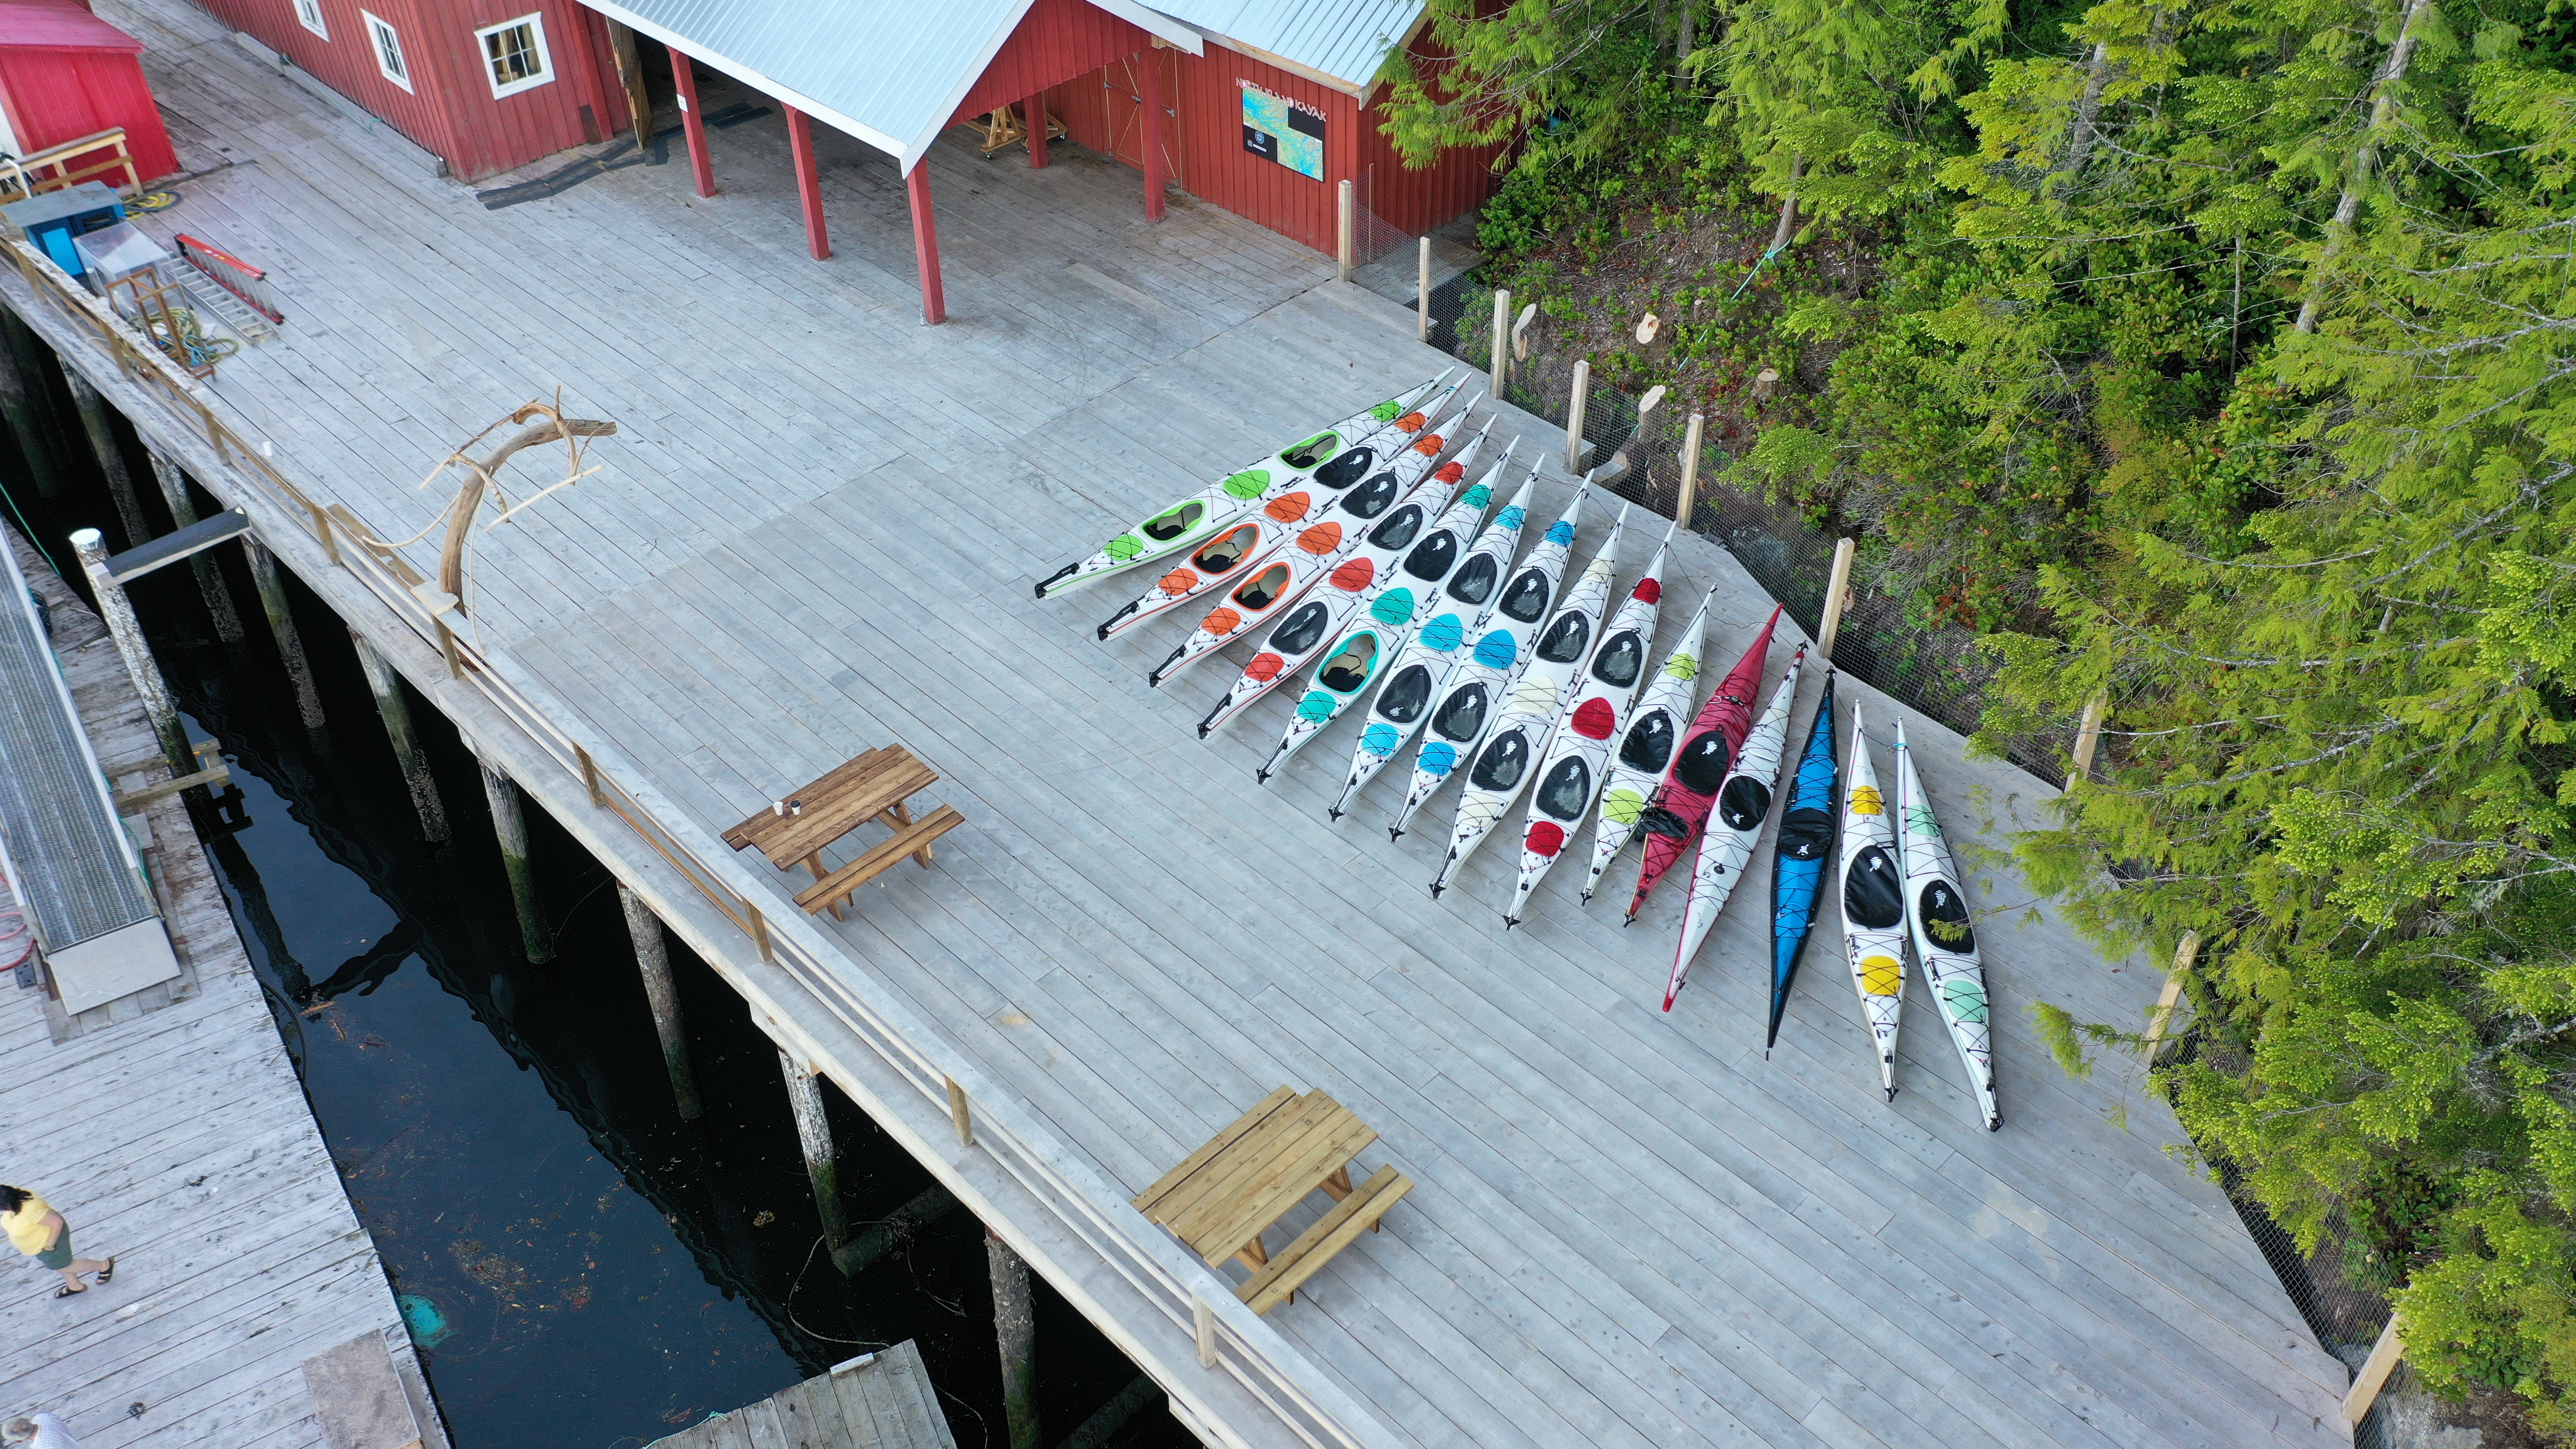 kayaks lined up on the dock